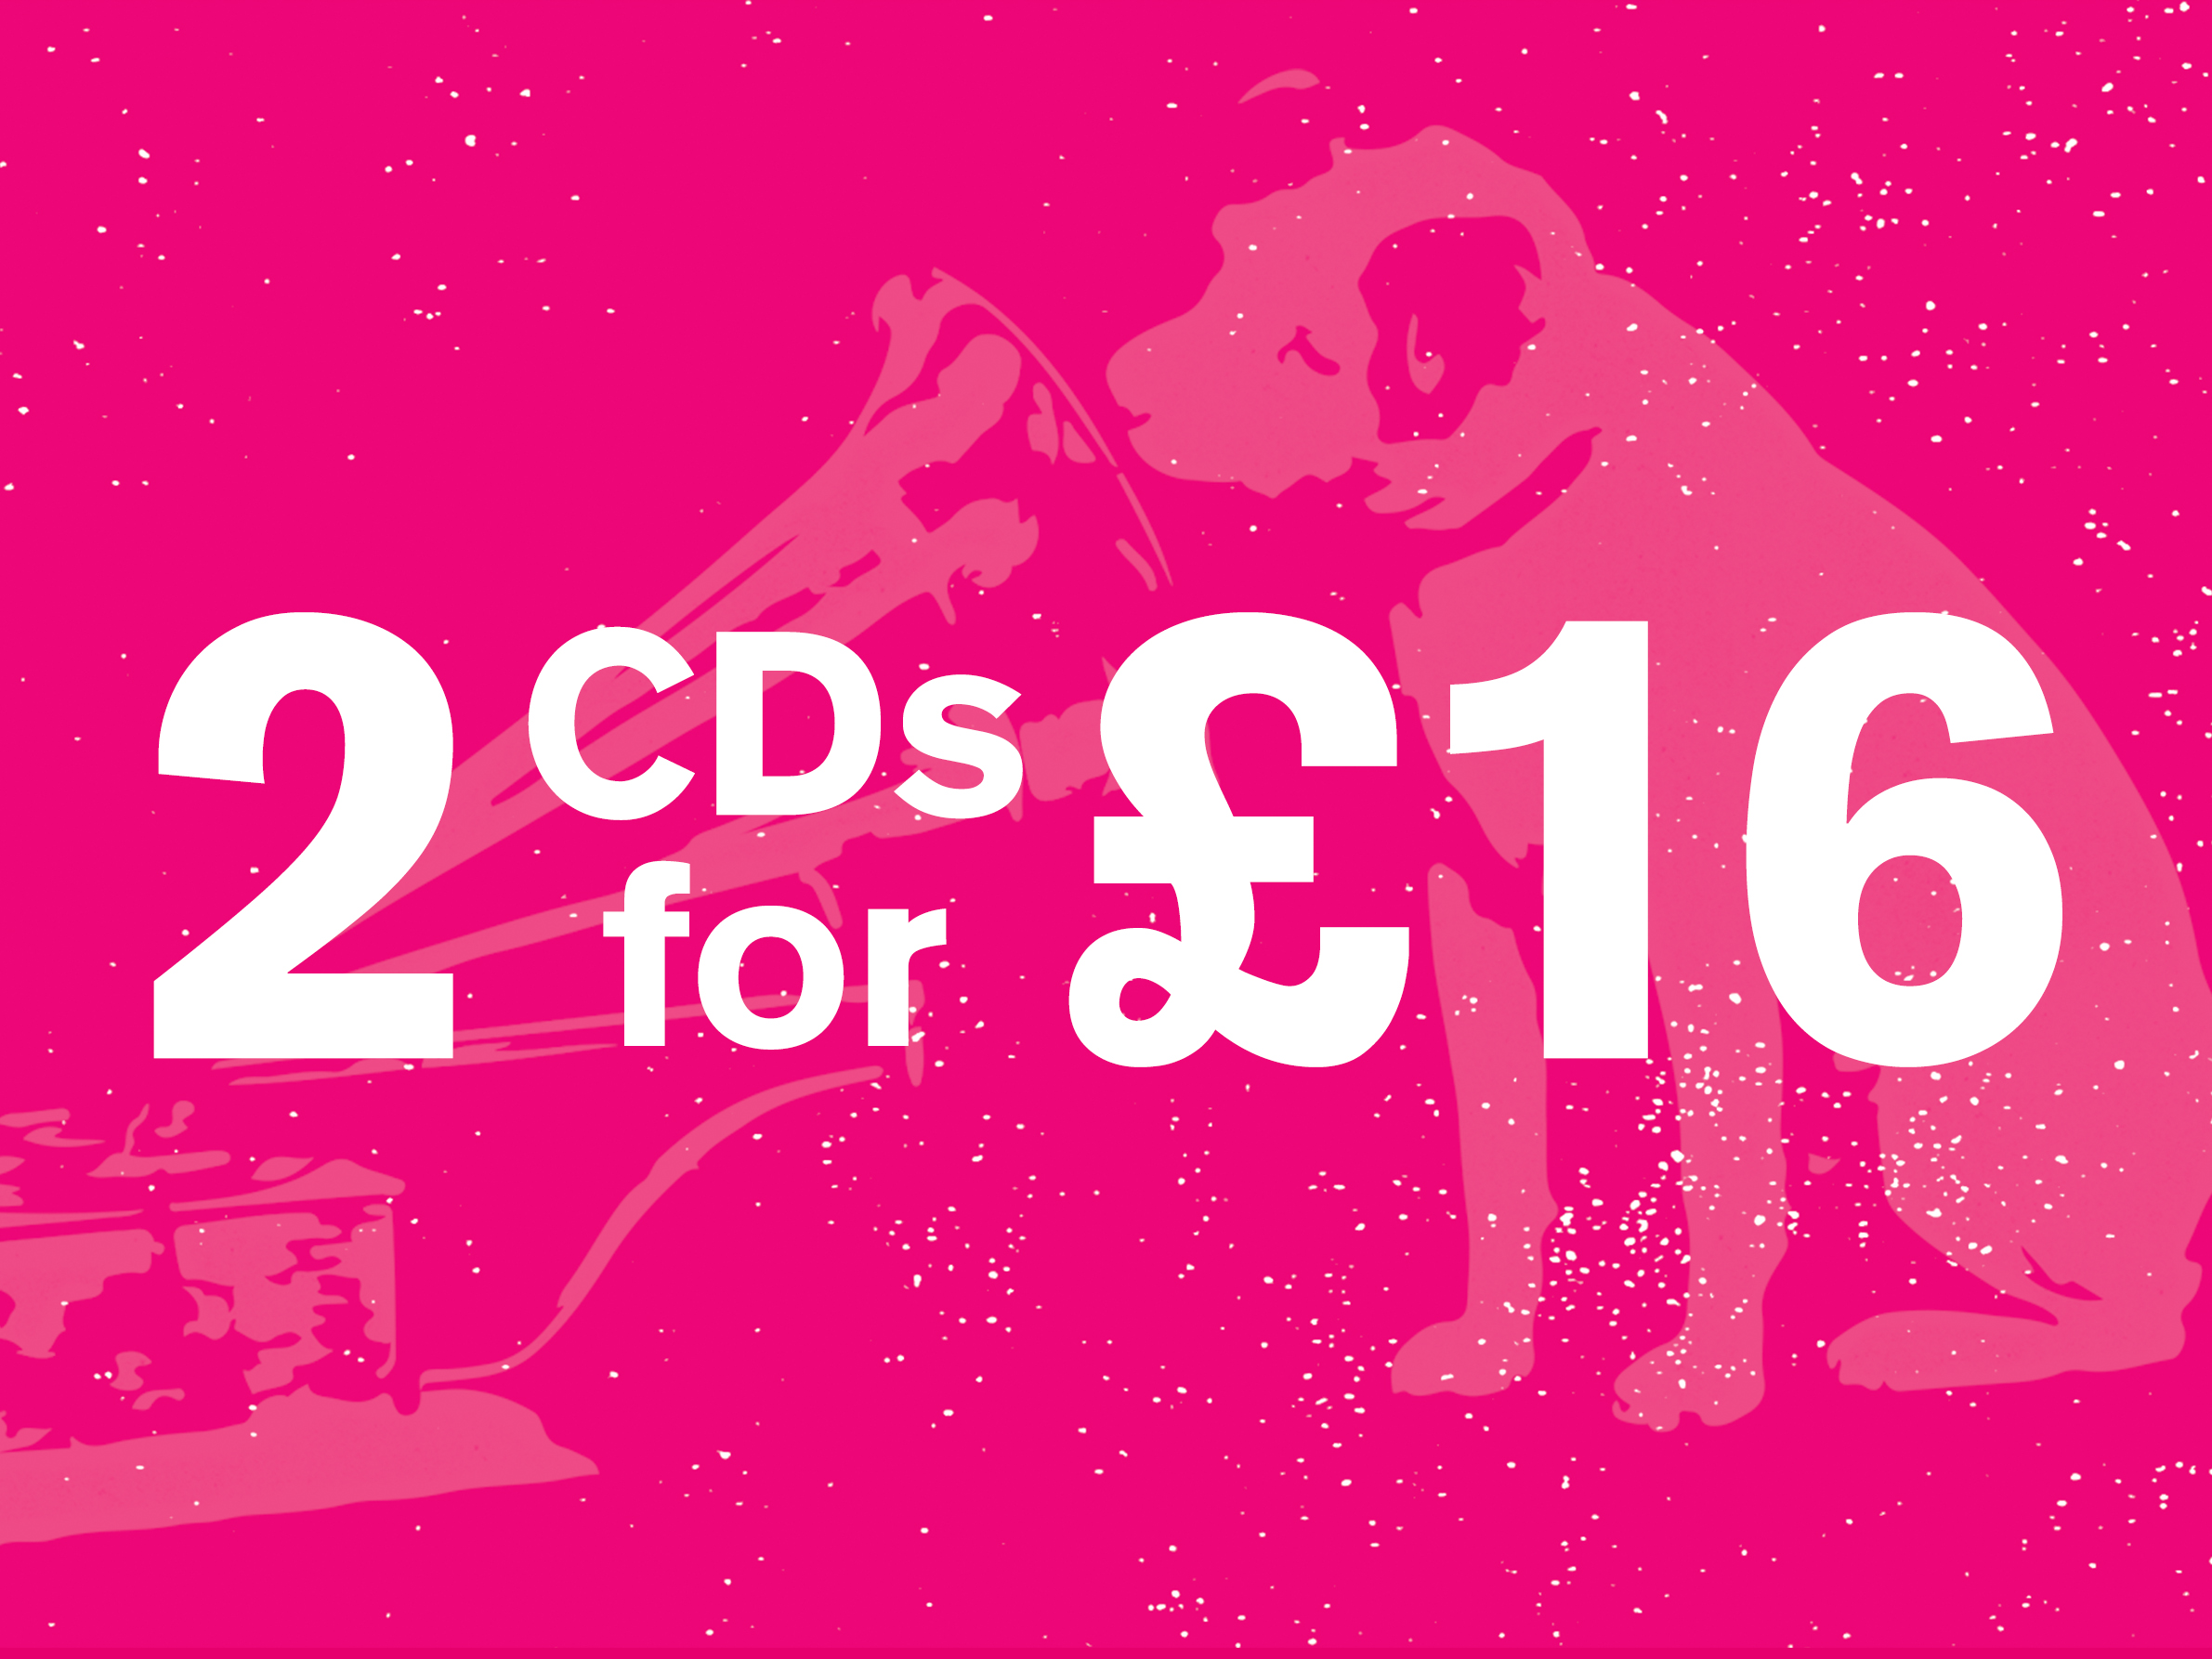 CD 2 for £16